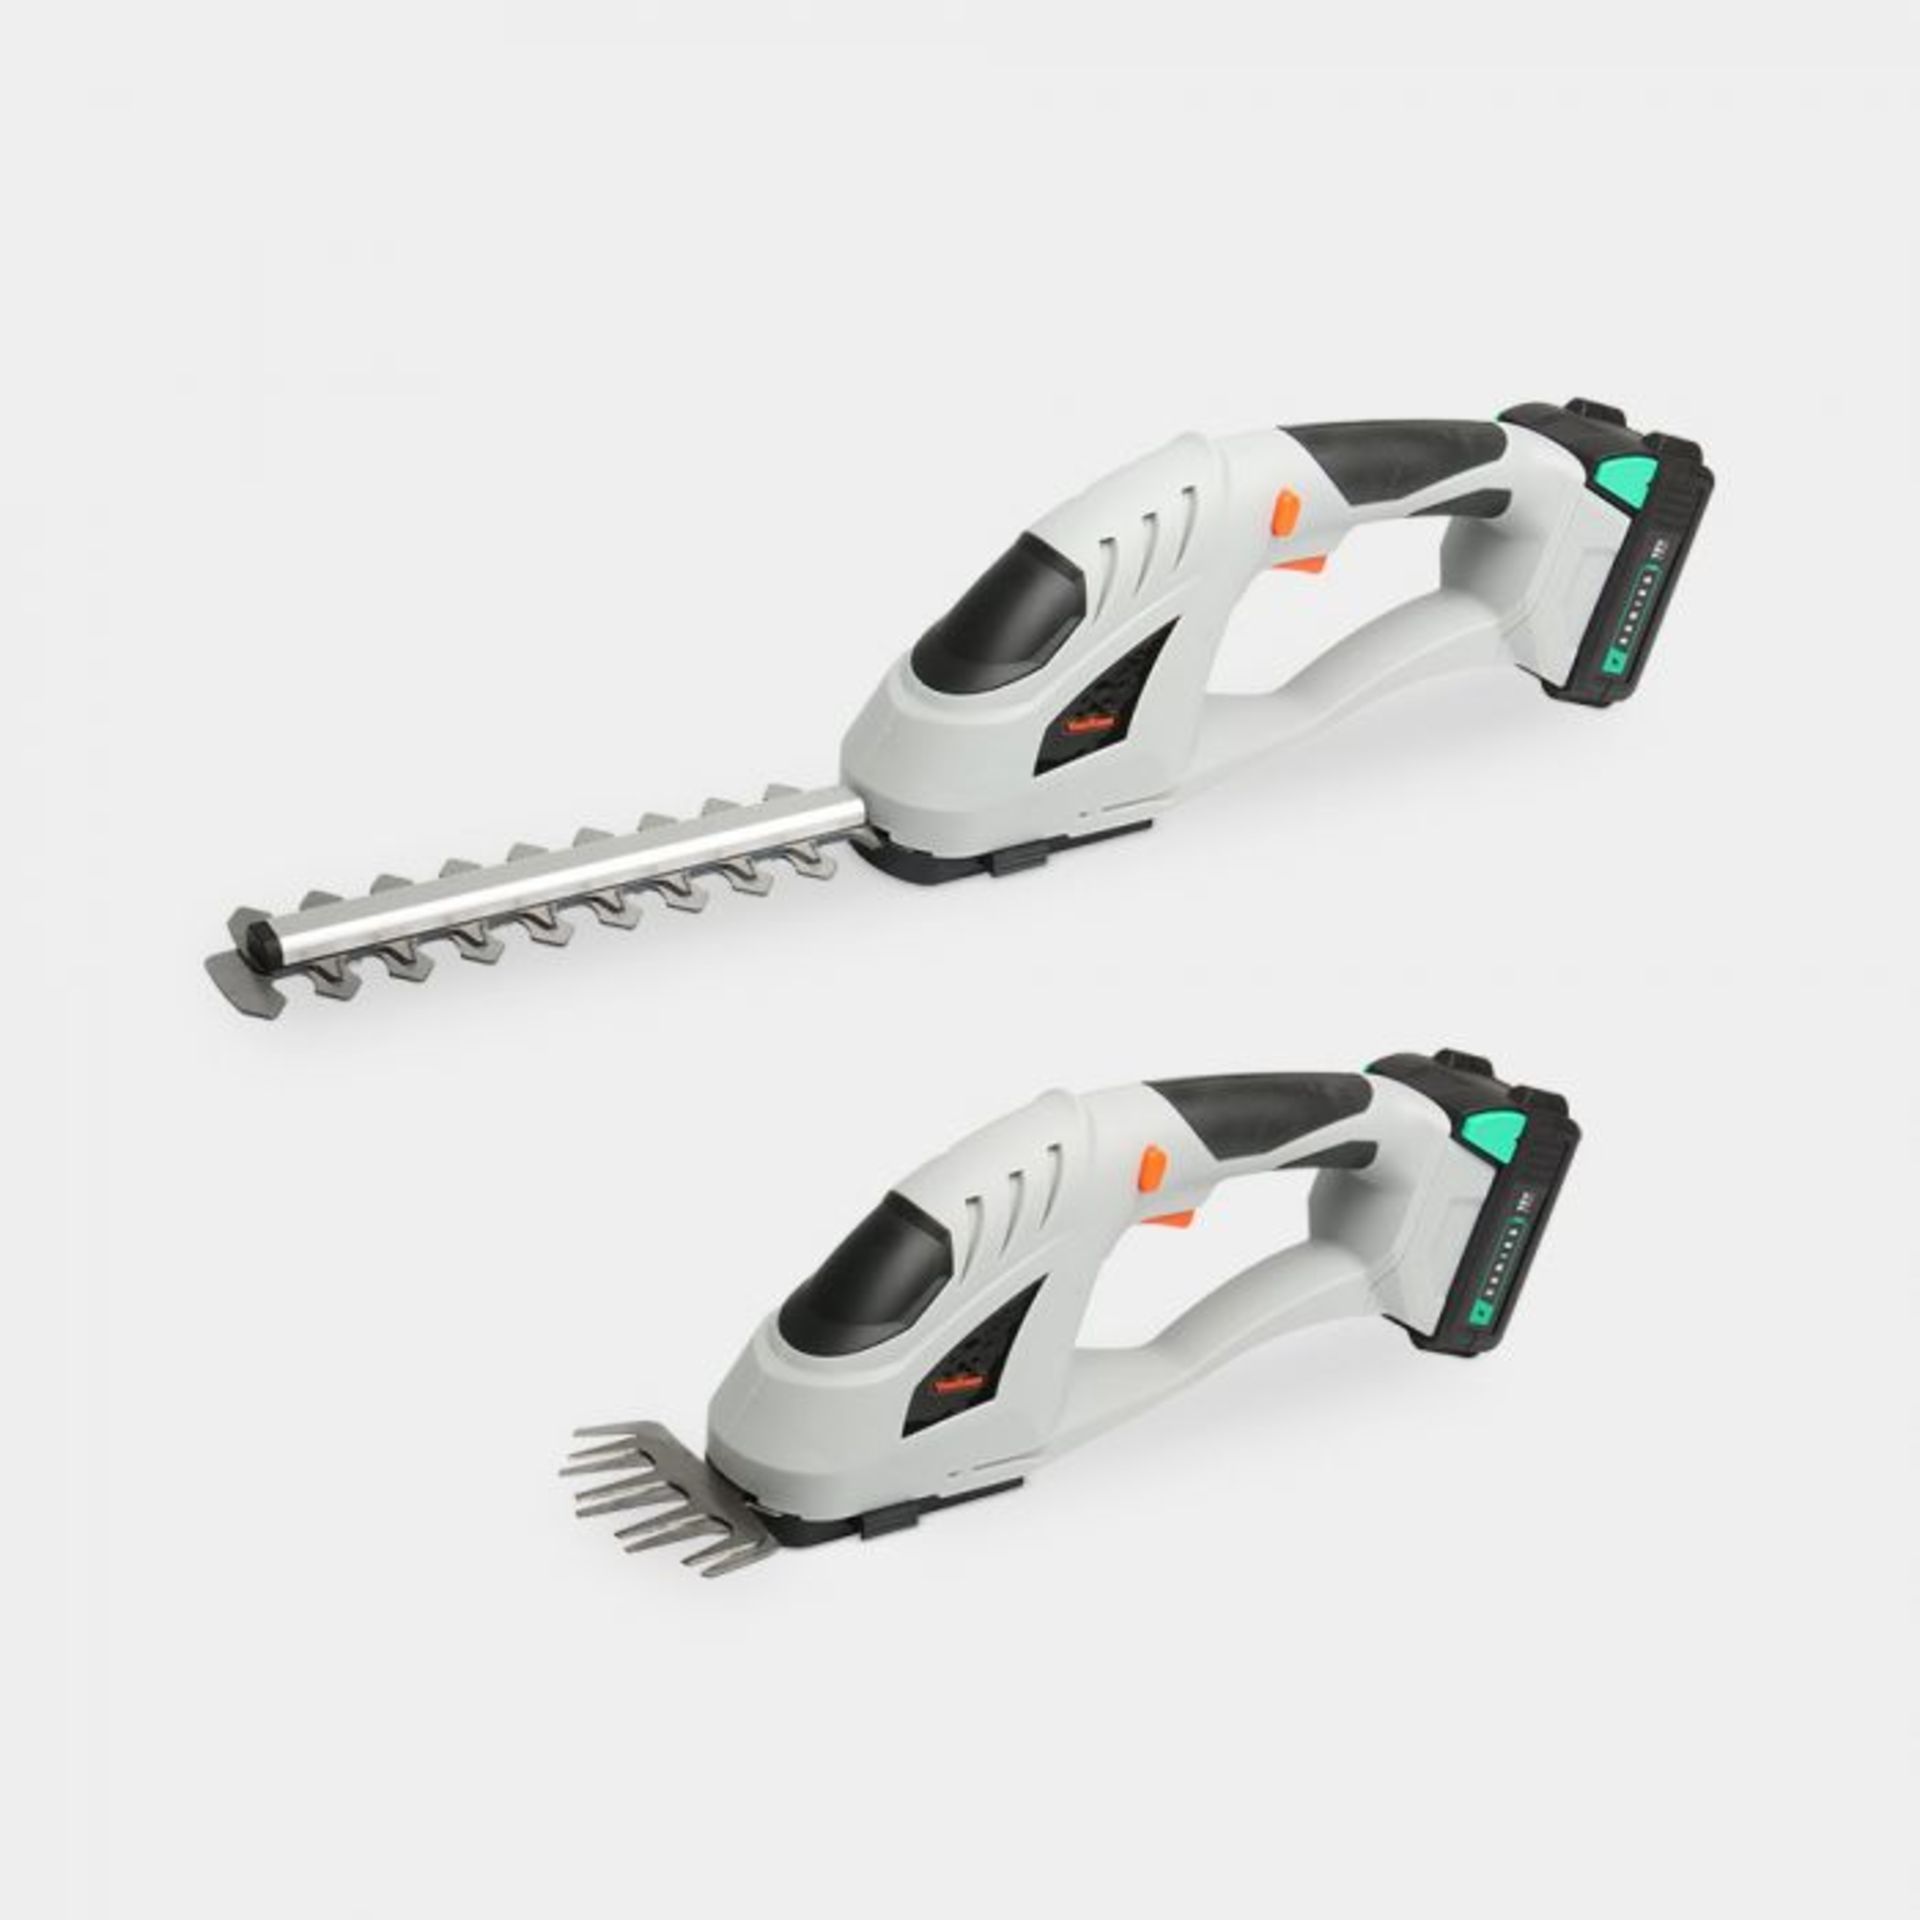 F-Series Cordless Grass and Hedge Trimmer. The luxury F-Series 2-in-1 Cordless Grass and Hedge